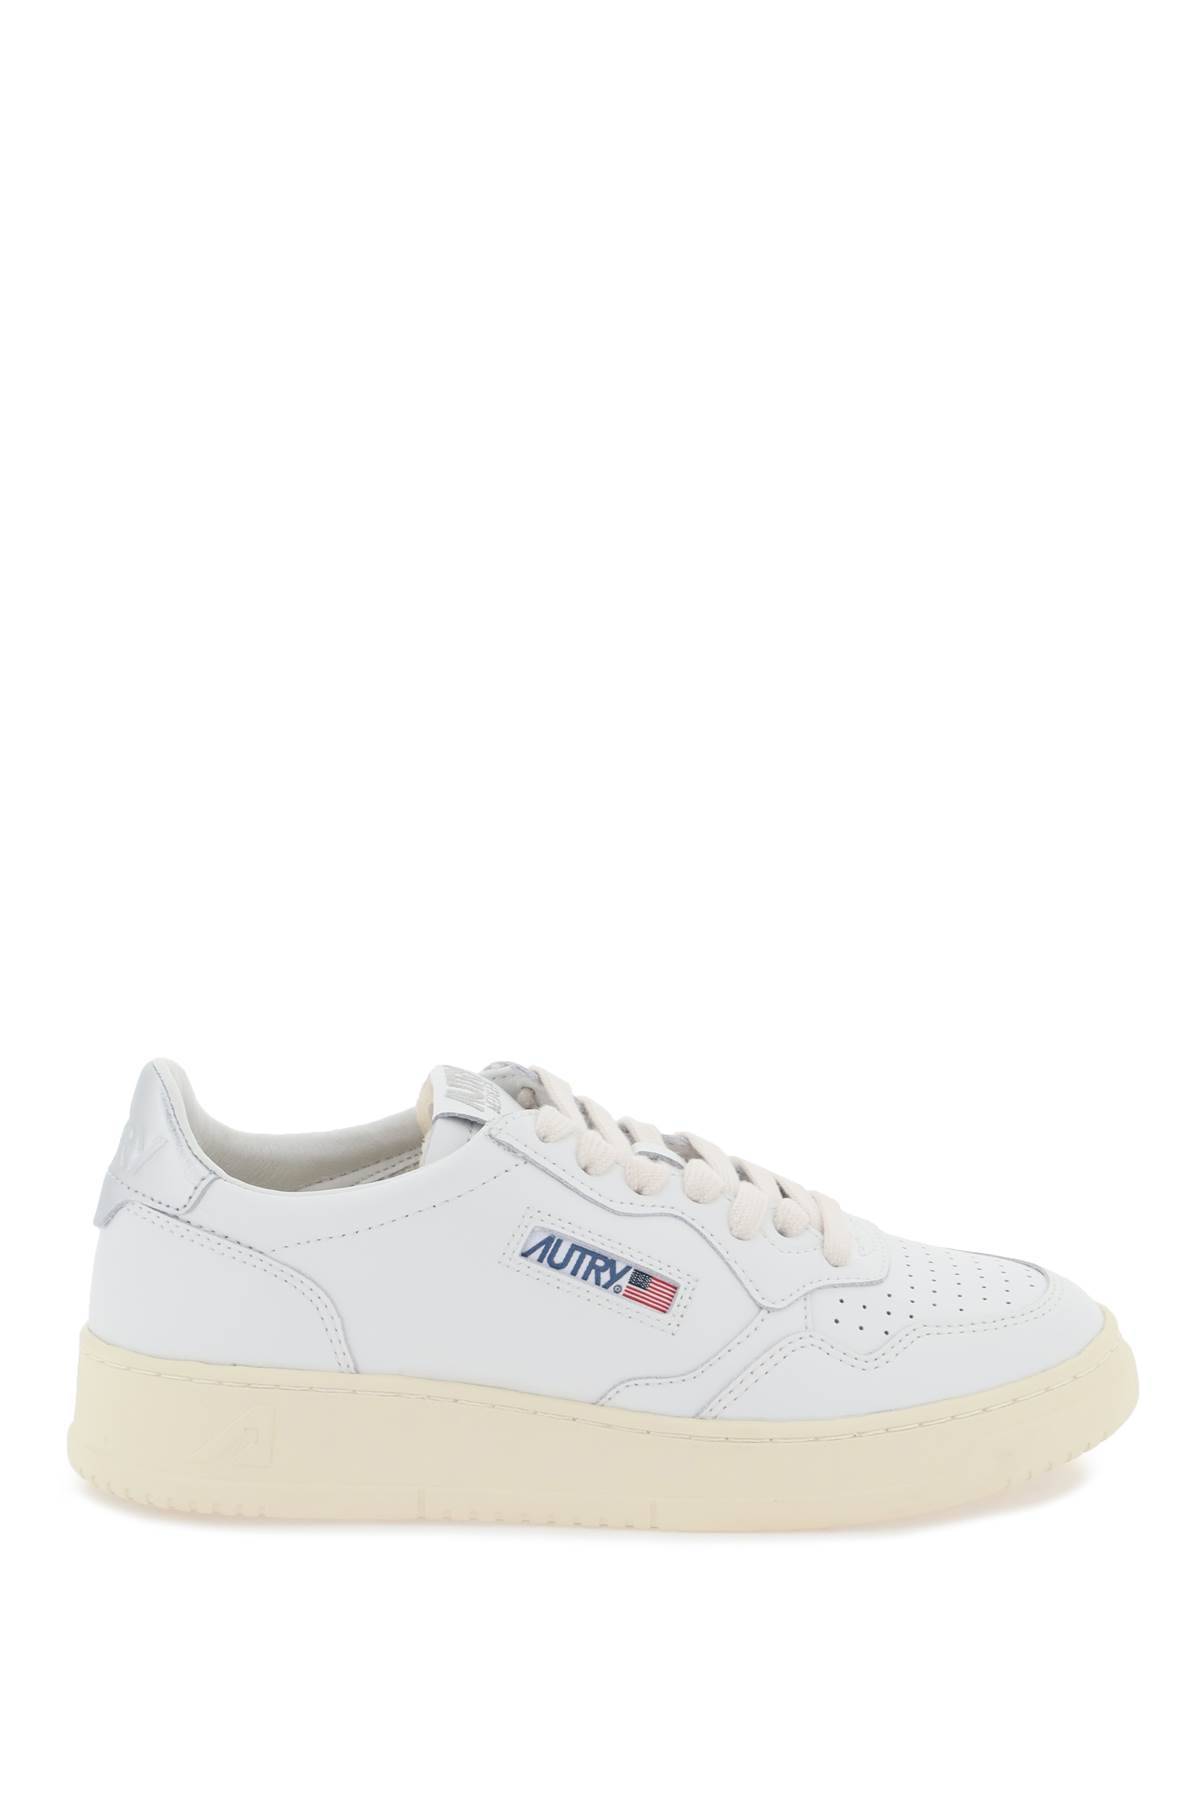 AUTRY AUTRY leather medalist low sneakers